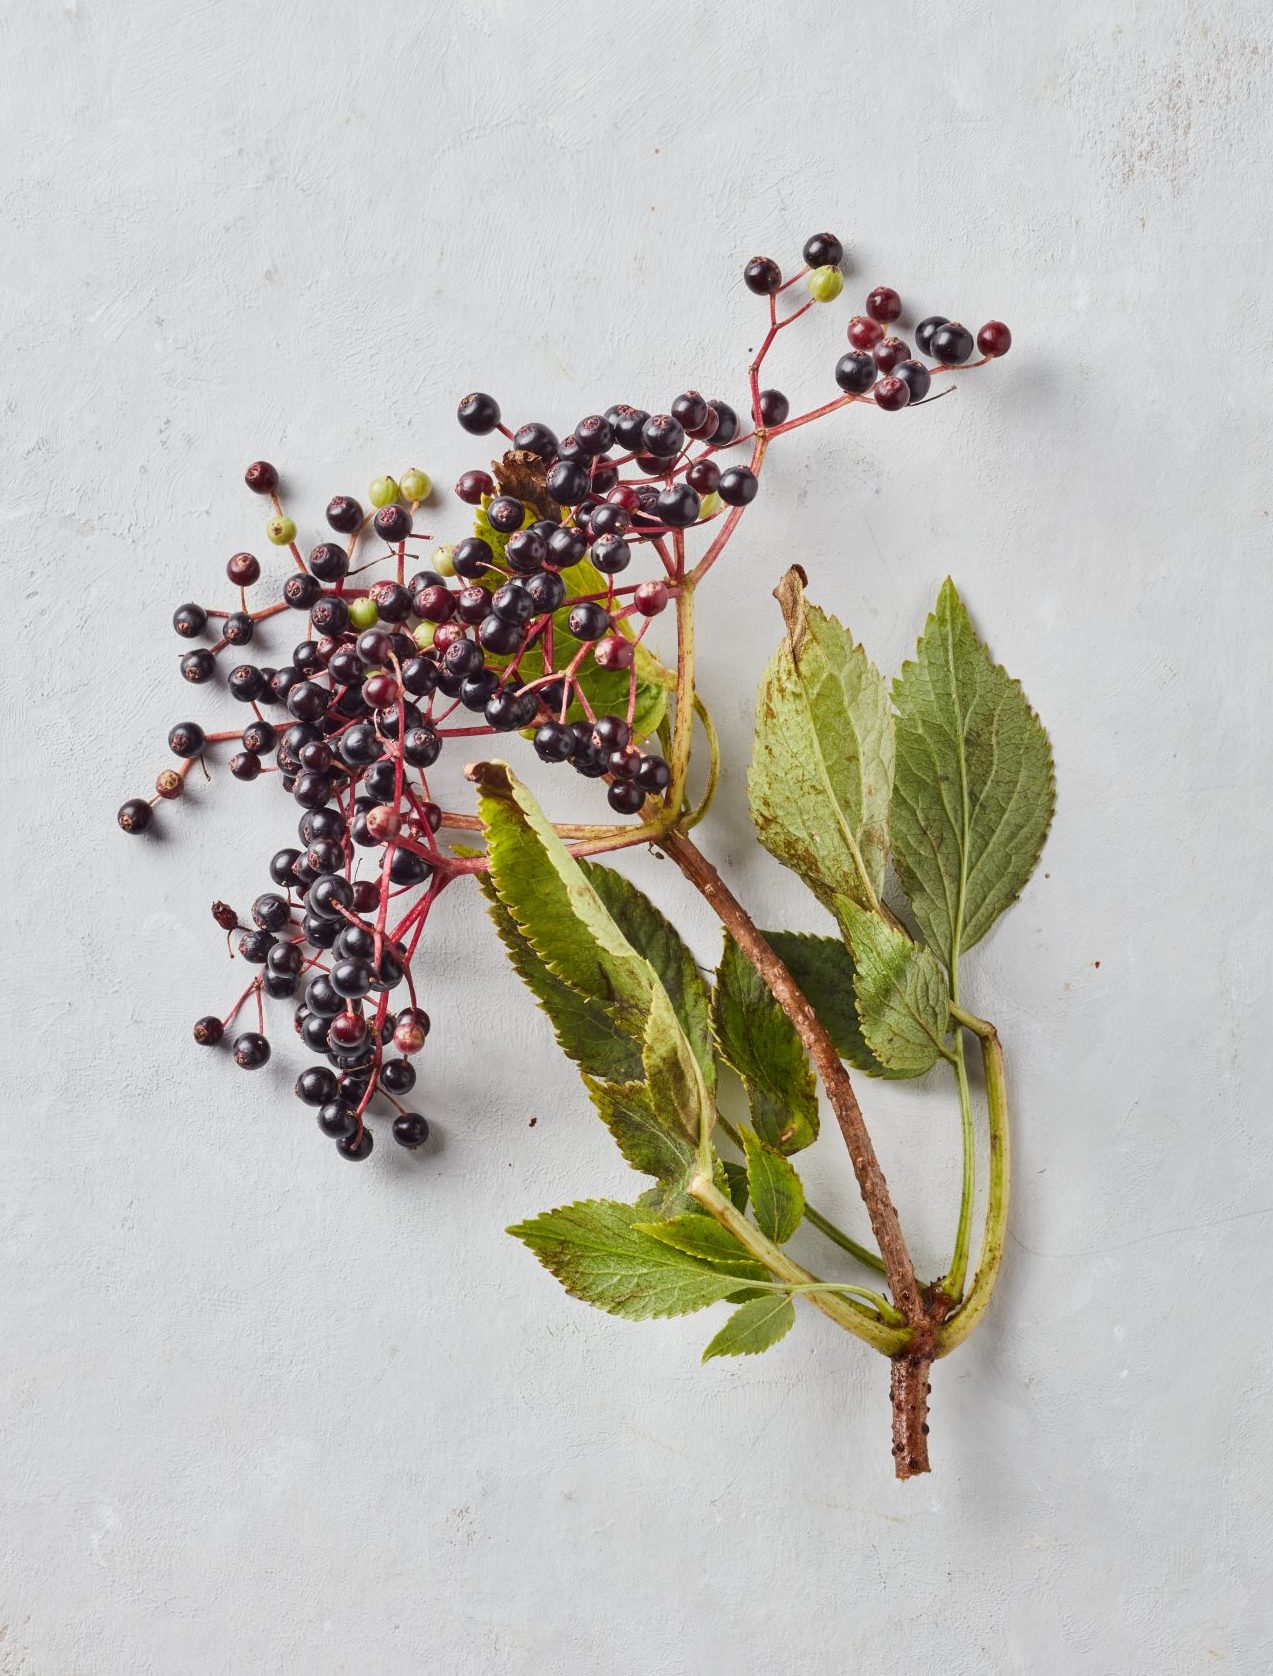 Sprig of elderberries and leaves on a plain background